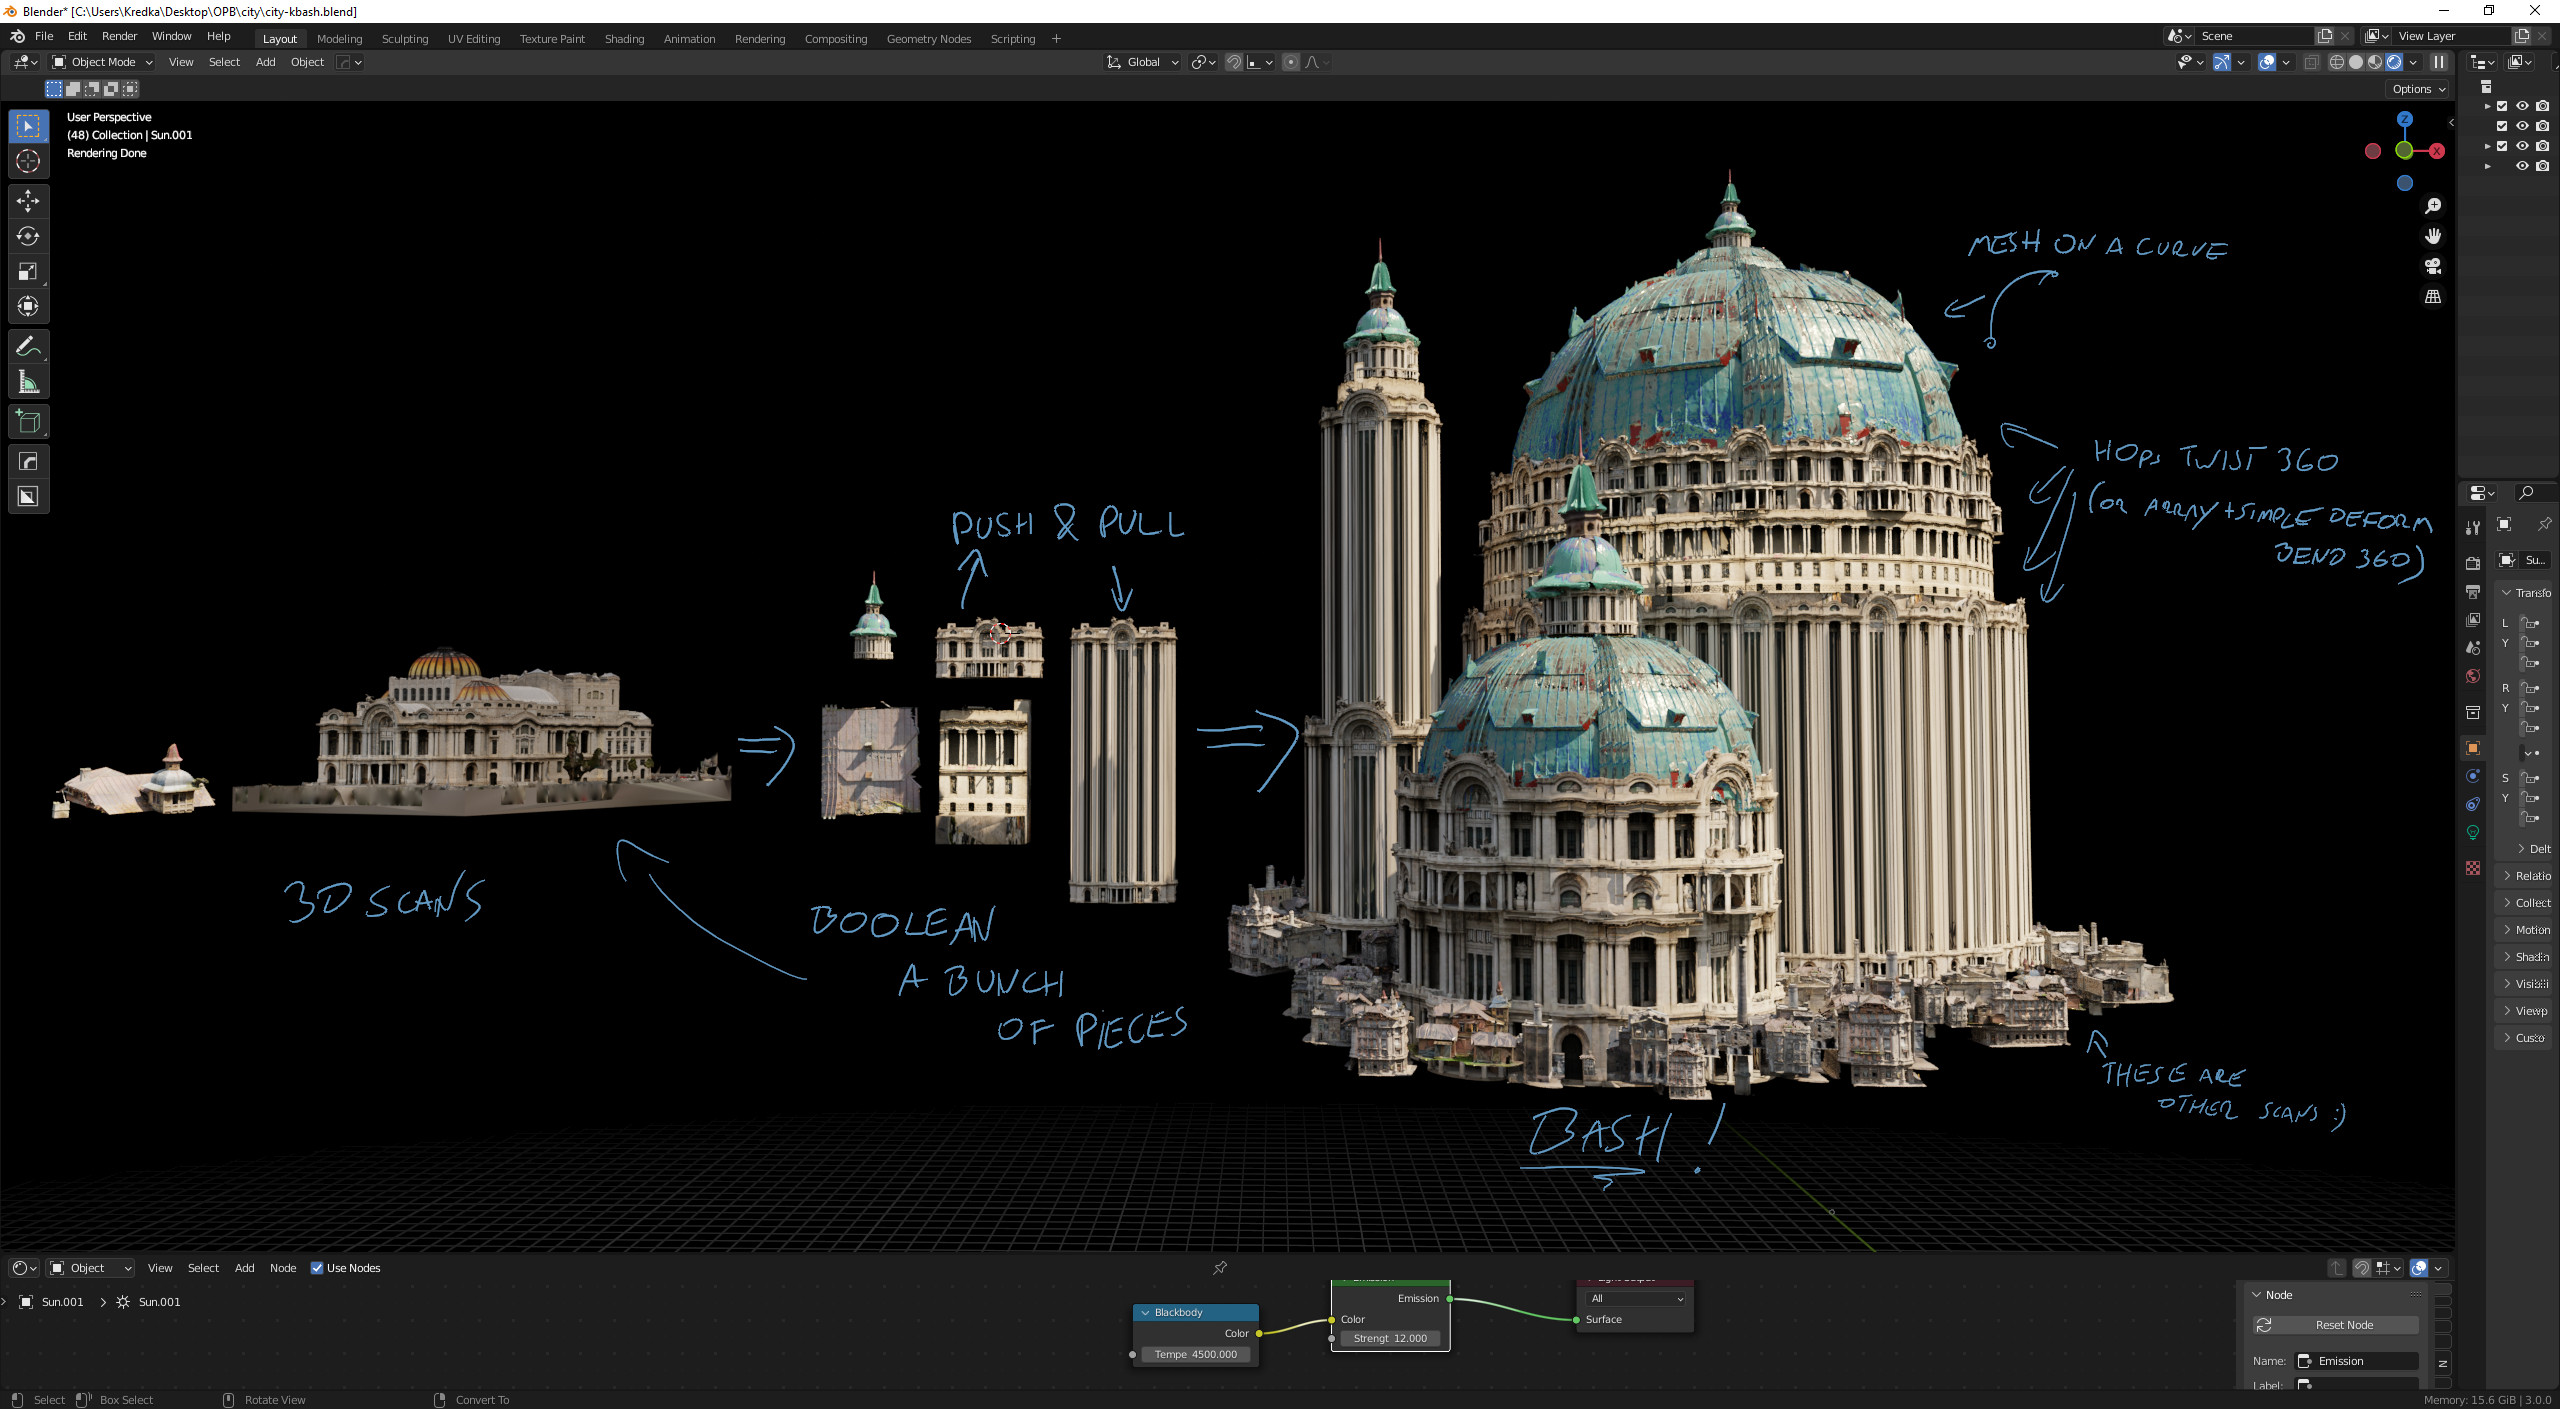 workflow tip #1 - link to the scan: https://sketchfab.com/3d-models/palace-of-fine-arts-photogrammetry-aerial-5eb98df6ad204542af3054071e3c4883 also tweak the textures!